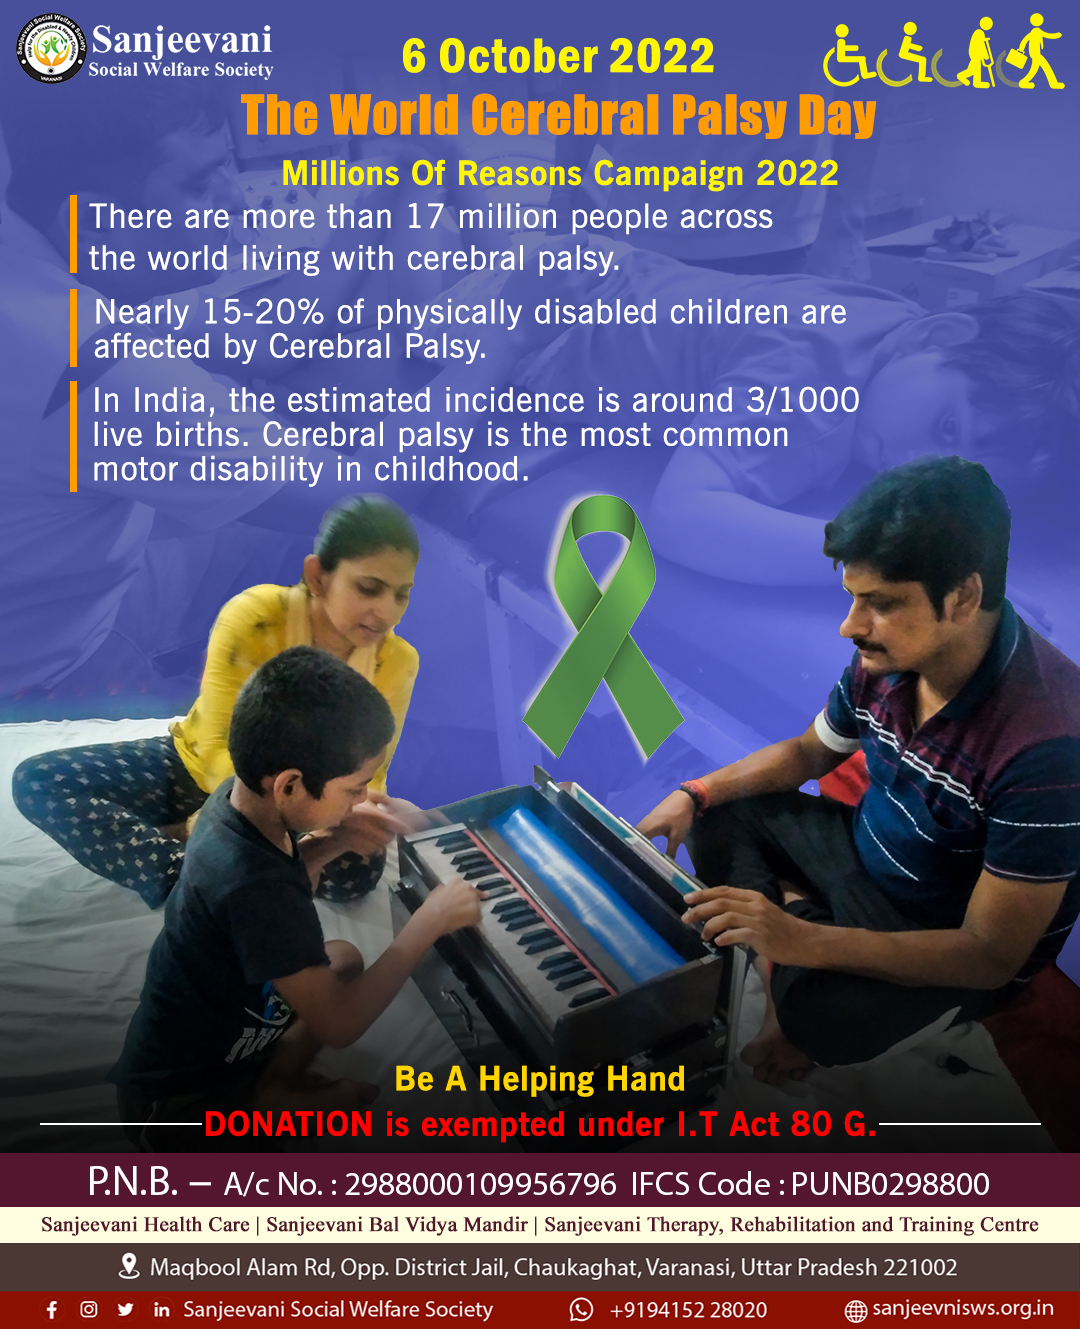 The World Cerebral Palsy Day